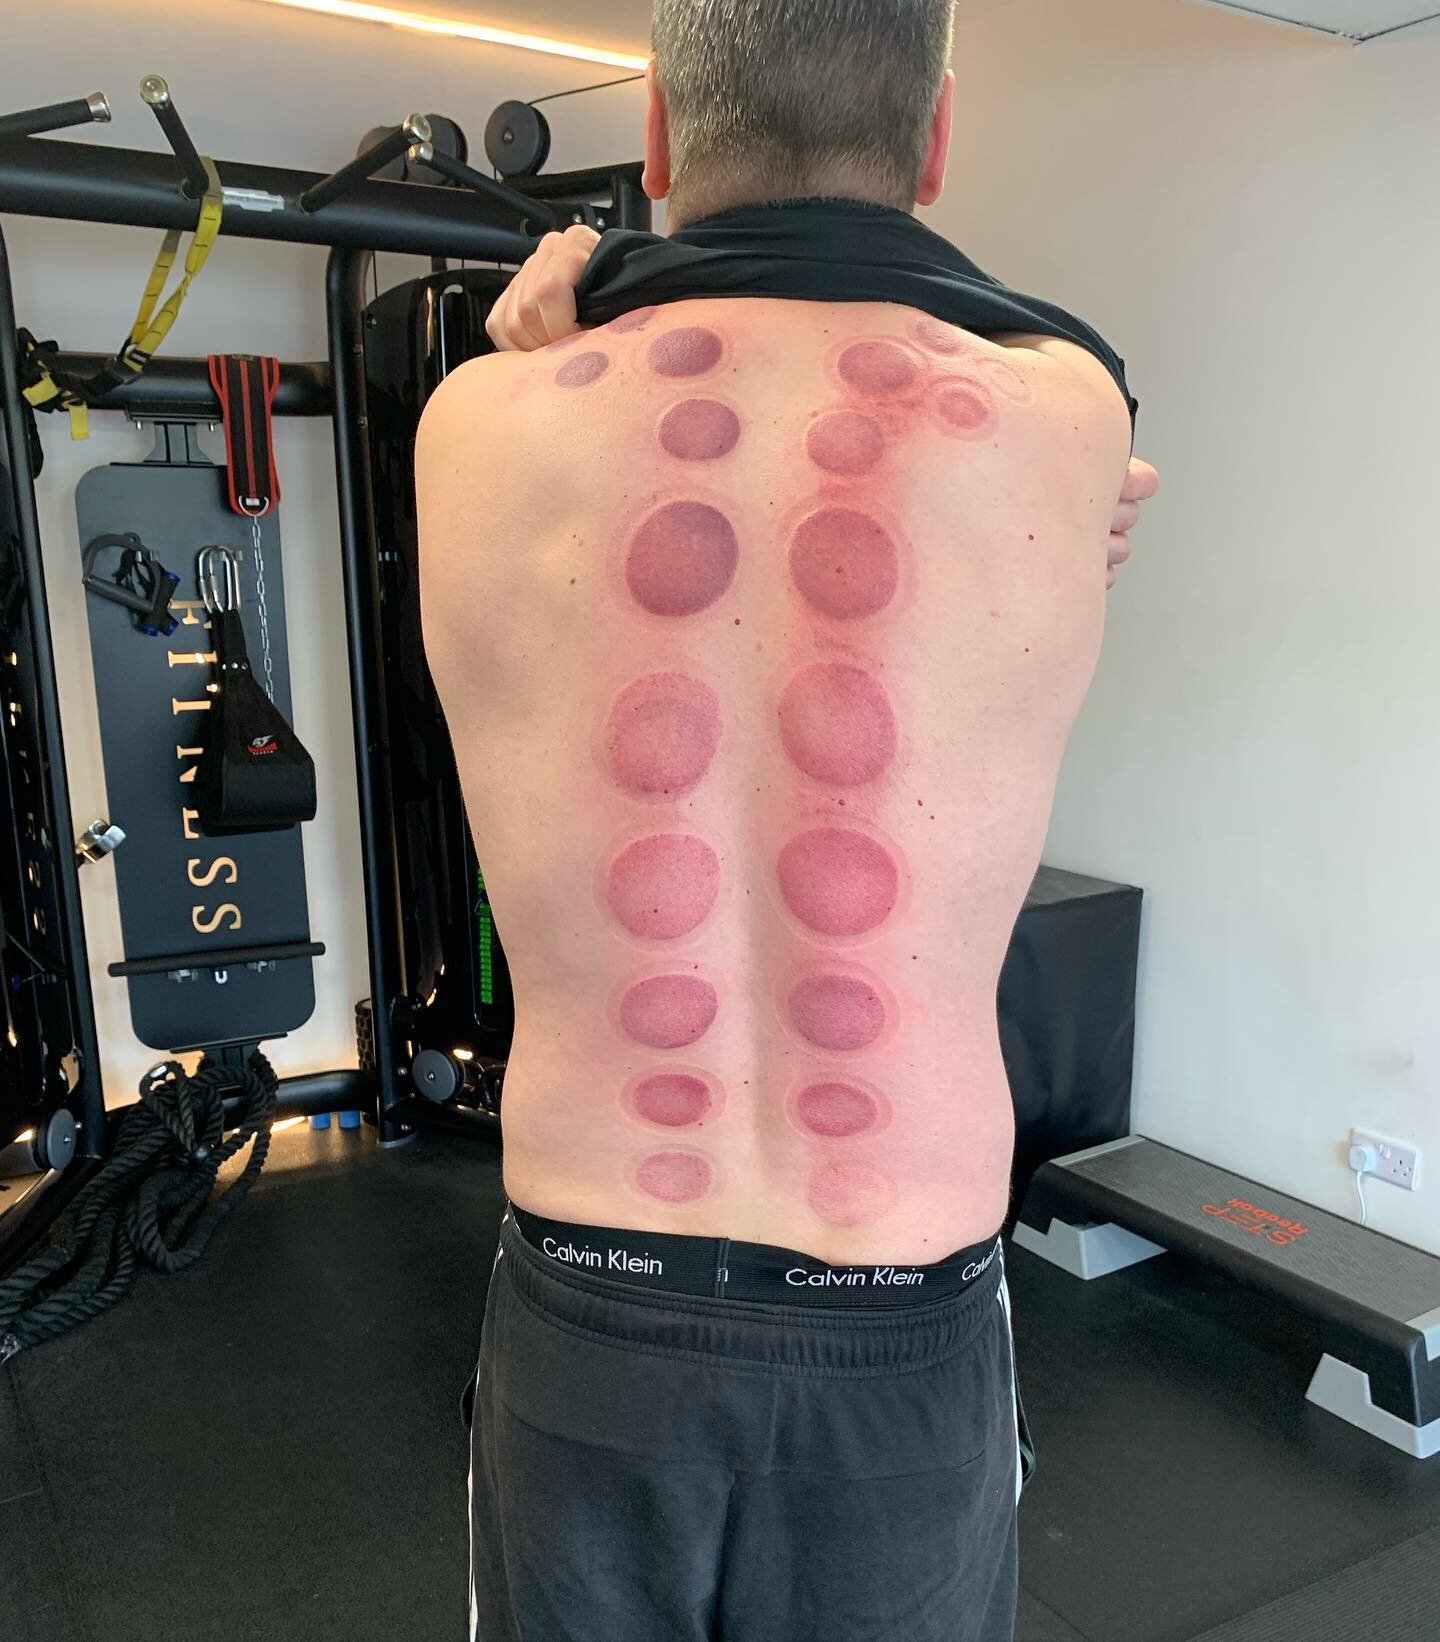 Ever tried Cupping? 😱
We now have appointments available every Friday. 
Deep Tissue, Sports &amp; Greco Roman Massage also available 
#massage #cupping #deeptissuemassage #massagetherapy #personaltraining #gym #results #bramhall #cheadlehulme #wilms